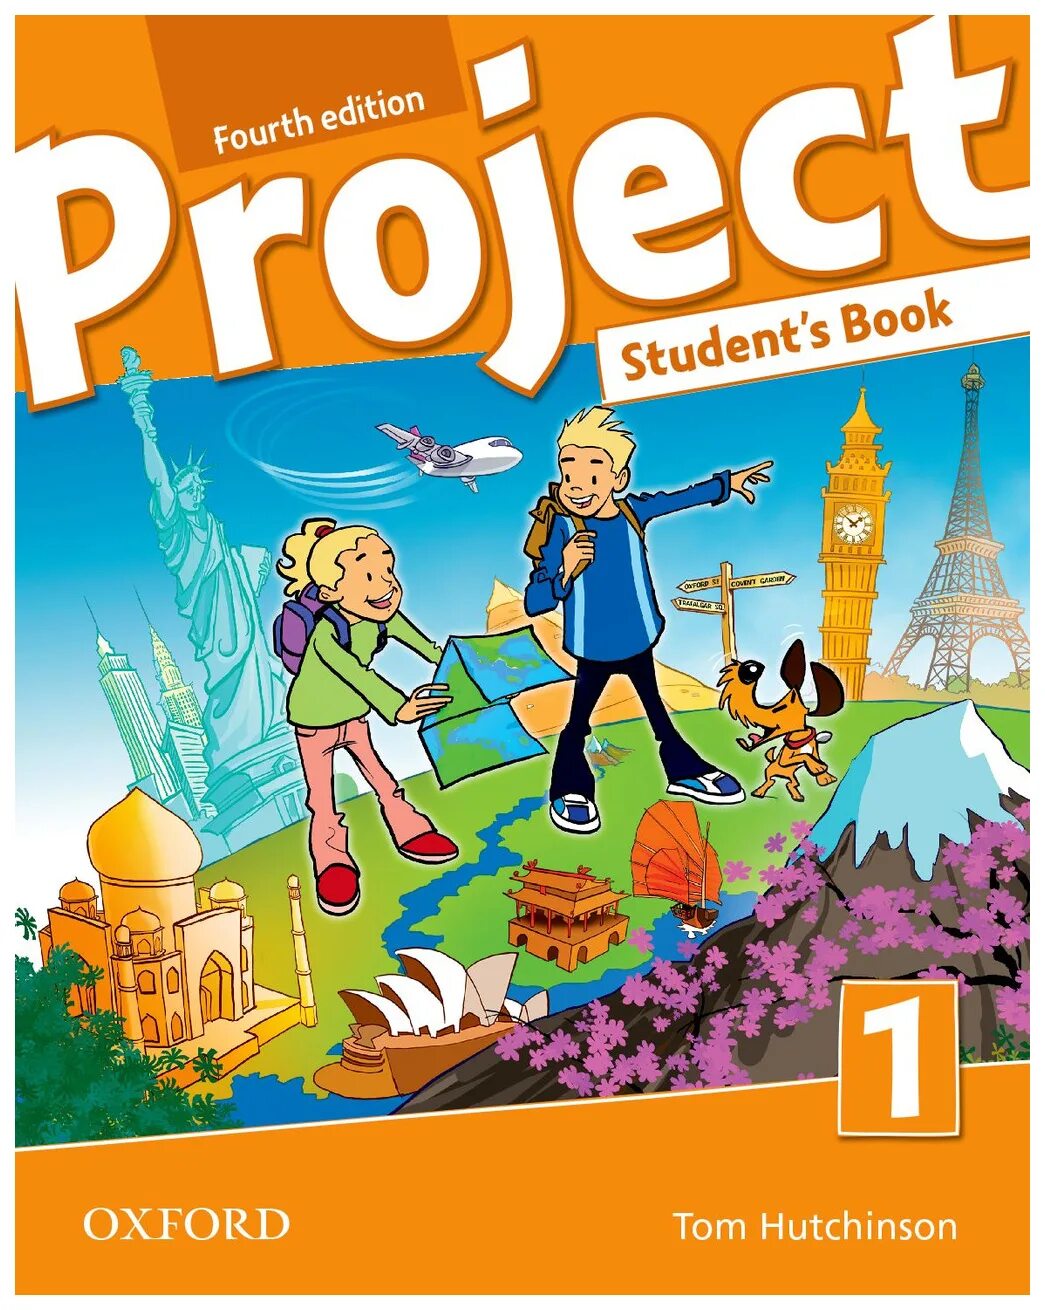 Project 1 book. Project 1 fourth Edition students book. Project 1 4th Edition. Project student book4 fourth Edition Workbook book. Рабочая тетрадь Project 1 Oxford Tom Hutchinson.